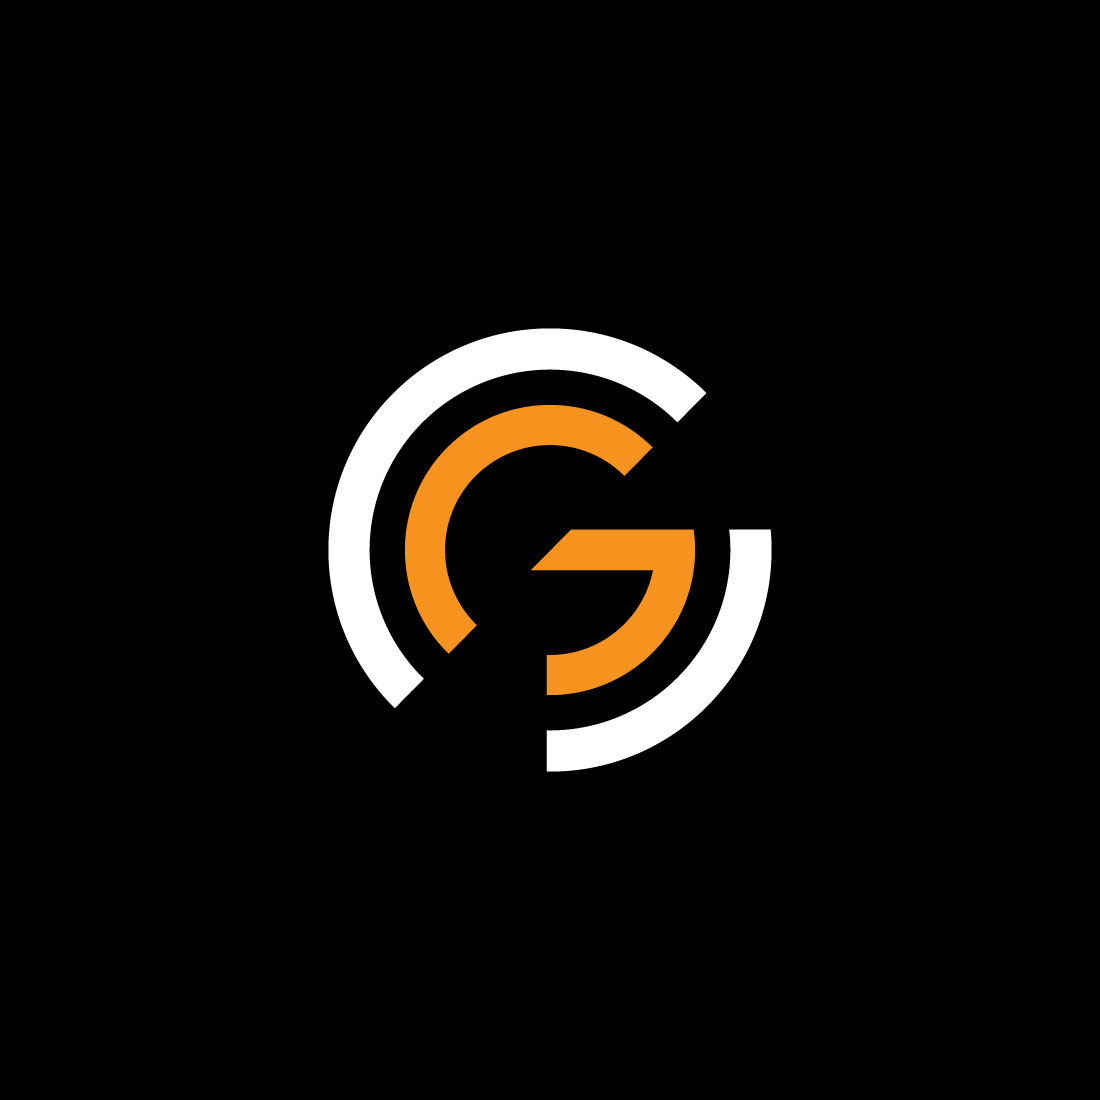 Simple G Logo Design Template cover image.